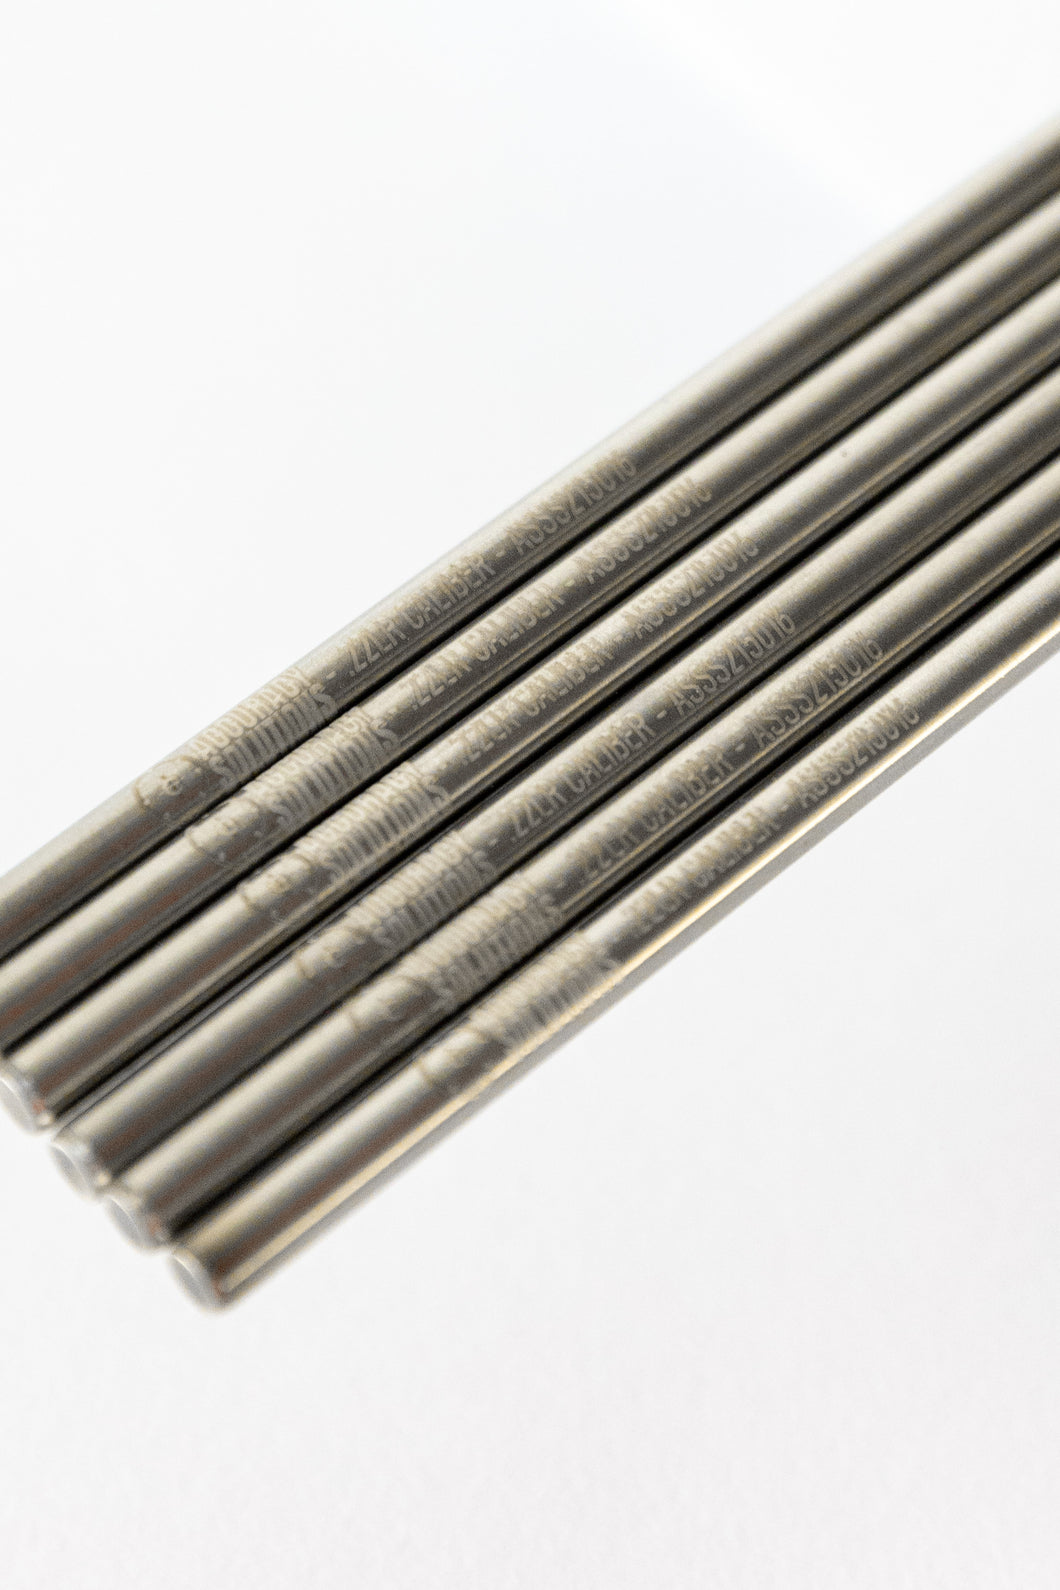 .22 LR Stainless Steel Bore Alignment Rod